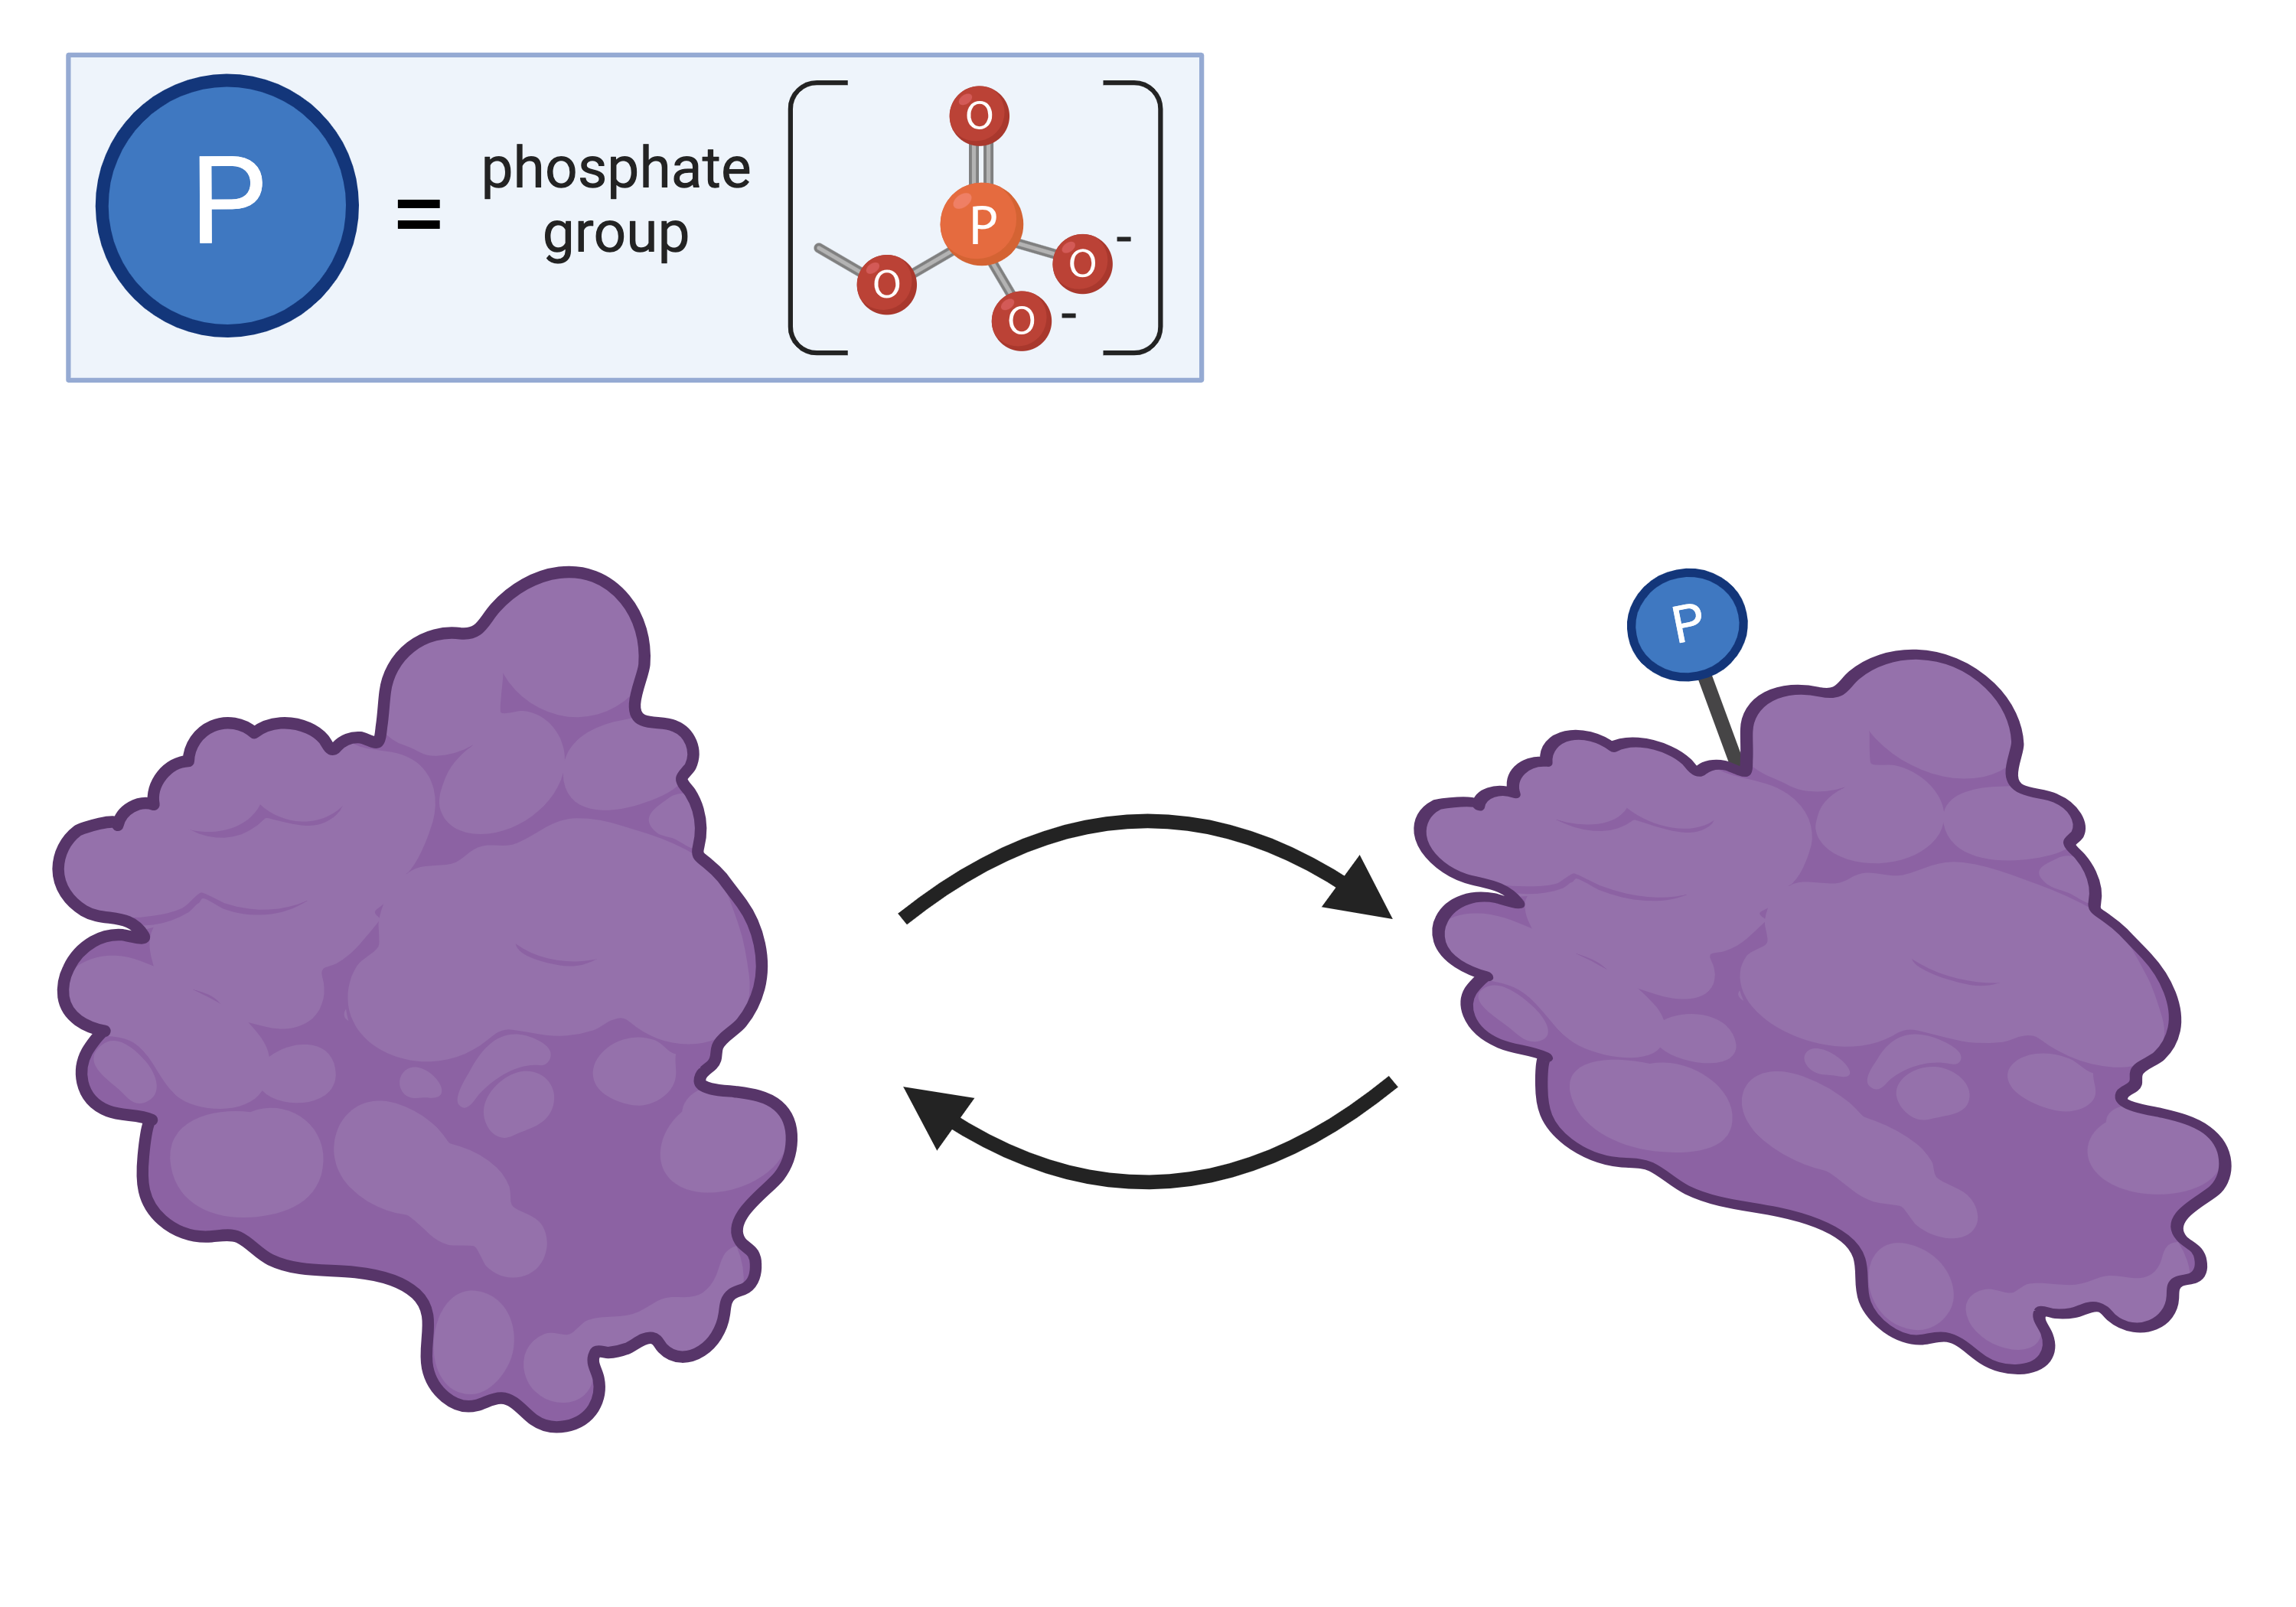 Phosphorylation and dephosphorylation. At left is a molecular surface diagram of a globular protein. There is an arrow pointing to the right with the label phosphorylation. At right is the same protein with a line attaching it to a circle labeled Upper P. An arrow points from this figure back to the protein at left and is labeled dephosphorylation.